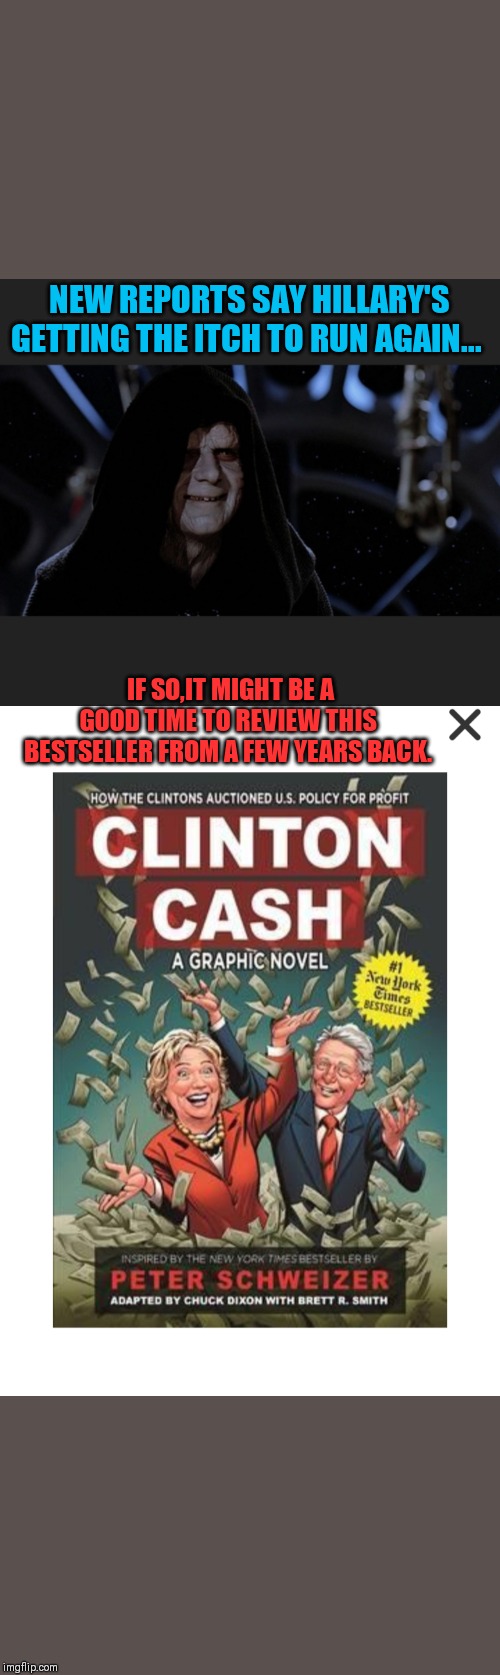 NEW REPORTS SAY HILLARY'S GETTING THE ITCH TO RUN AGAIN... IF SO,IT MIGHT BE A GOOD TIME TO REVIEW THIS BESTSELLER FROM A FEW YEARS BACK. | image tagged in hillary clinton fail,hillary for prison,crooked hillary | made w/ Imgflip meme maker